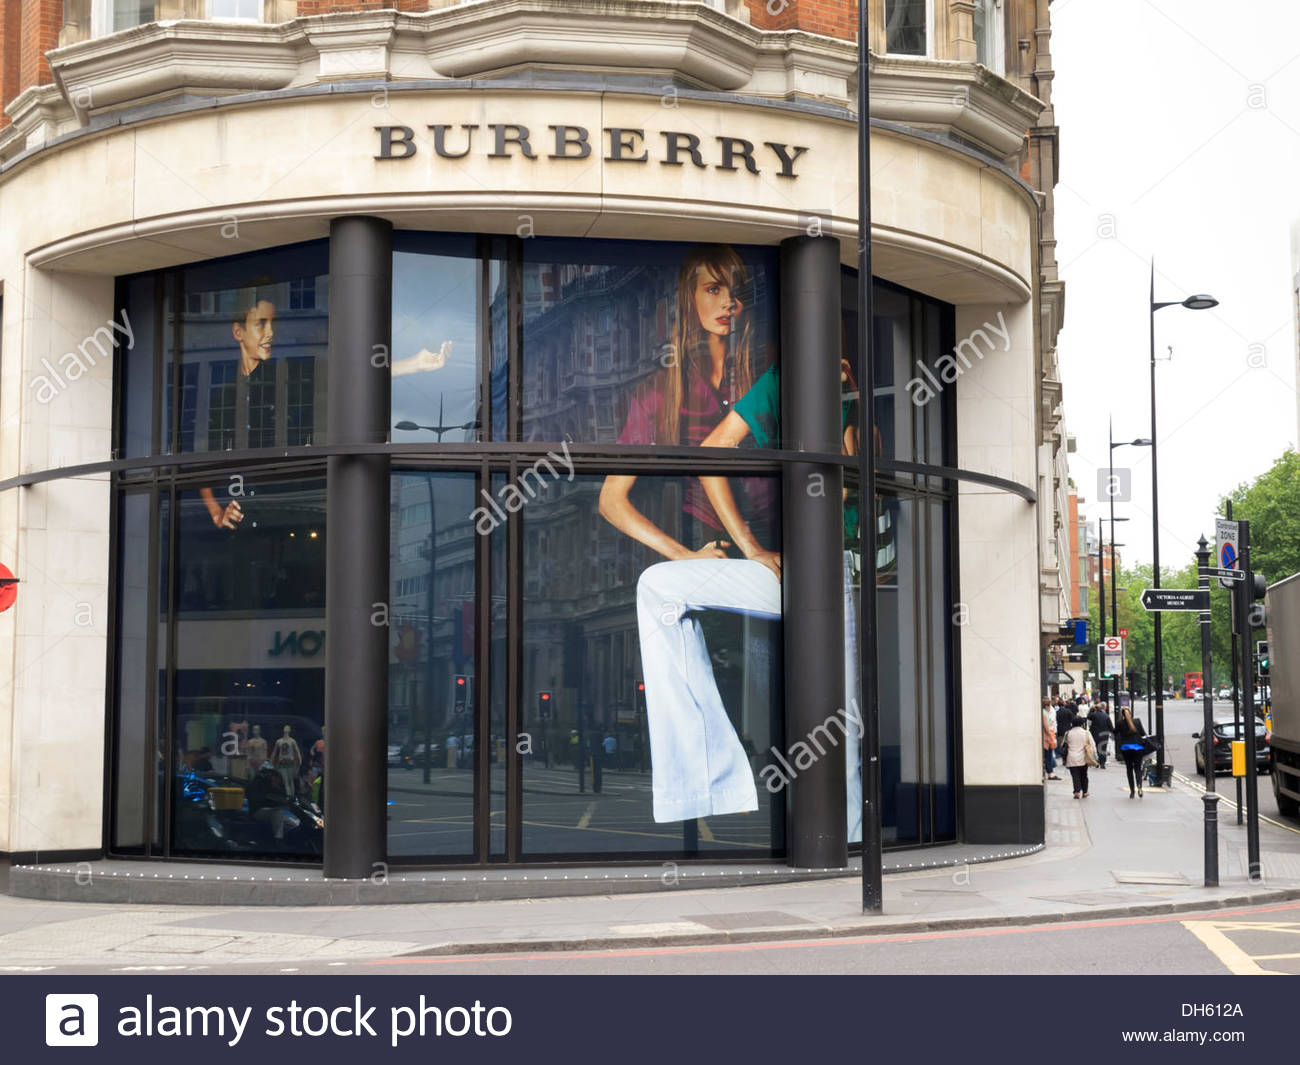 Burberry High Resolution Stock Photography and Images - Alamy